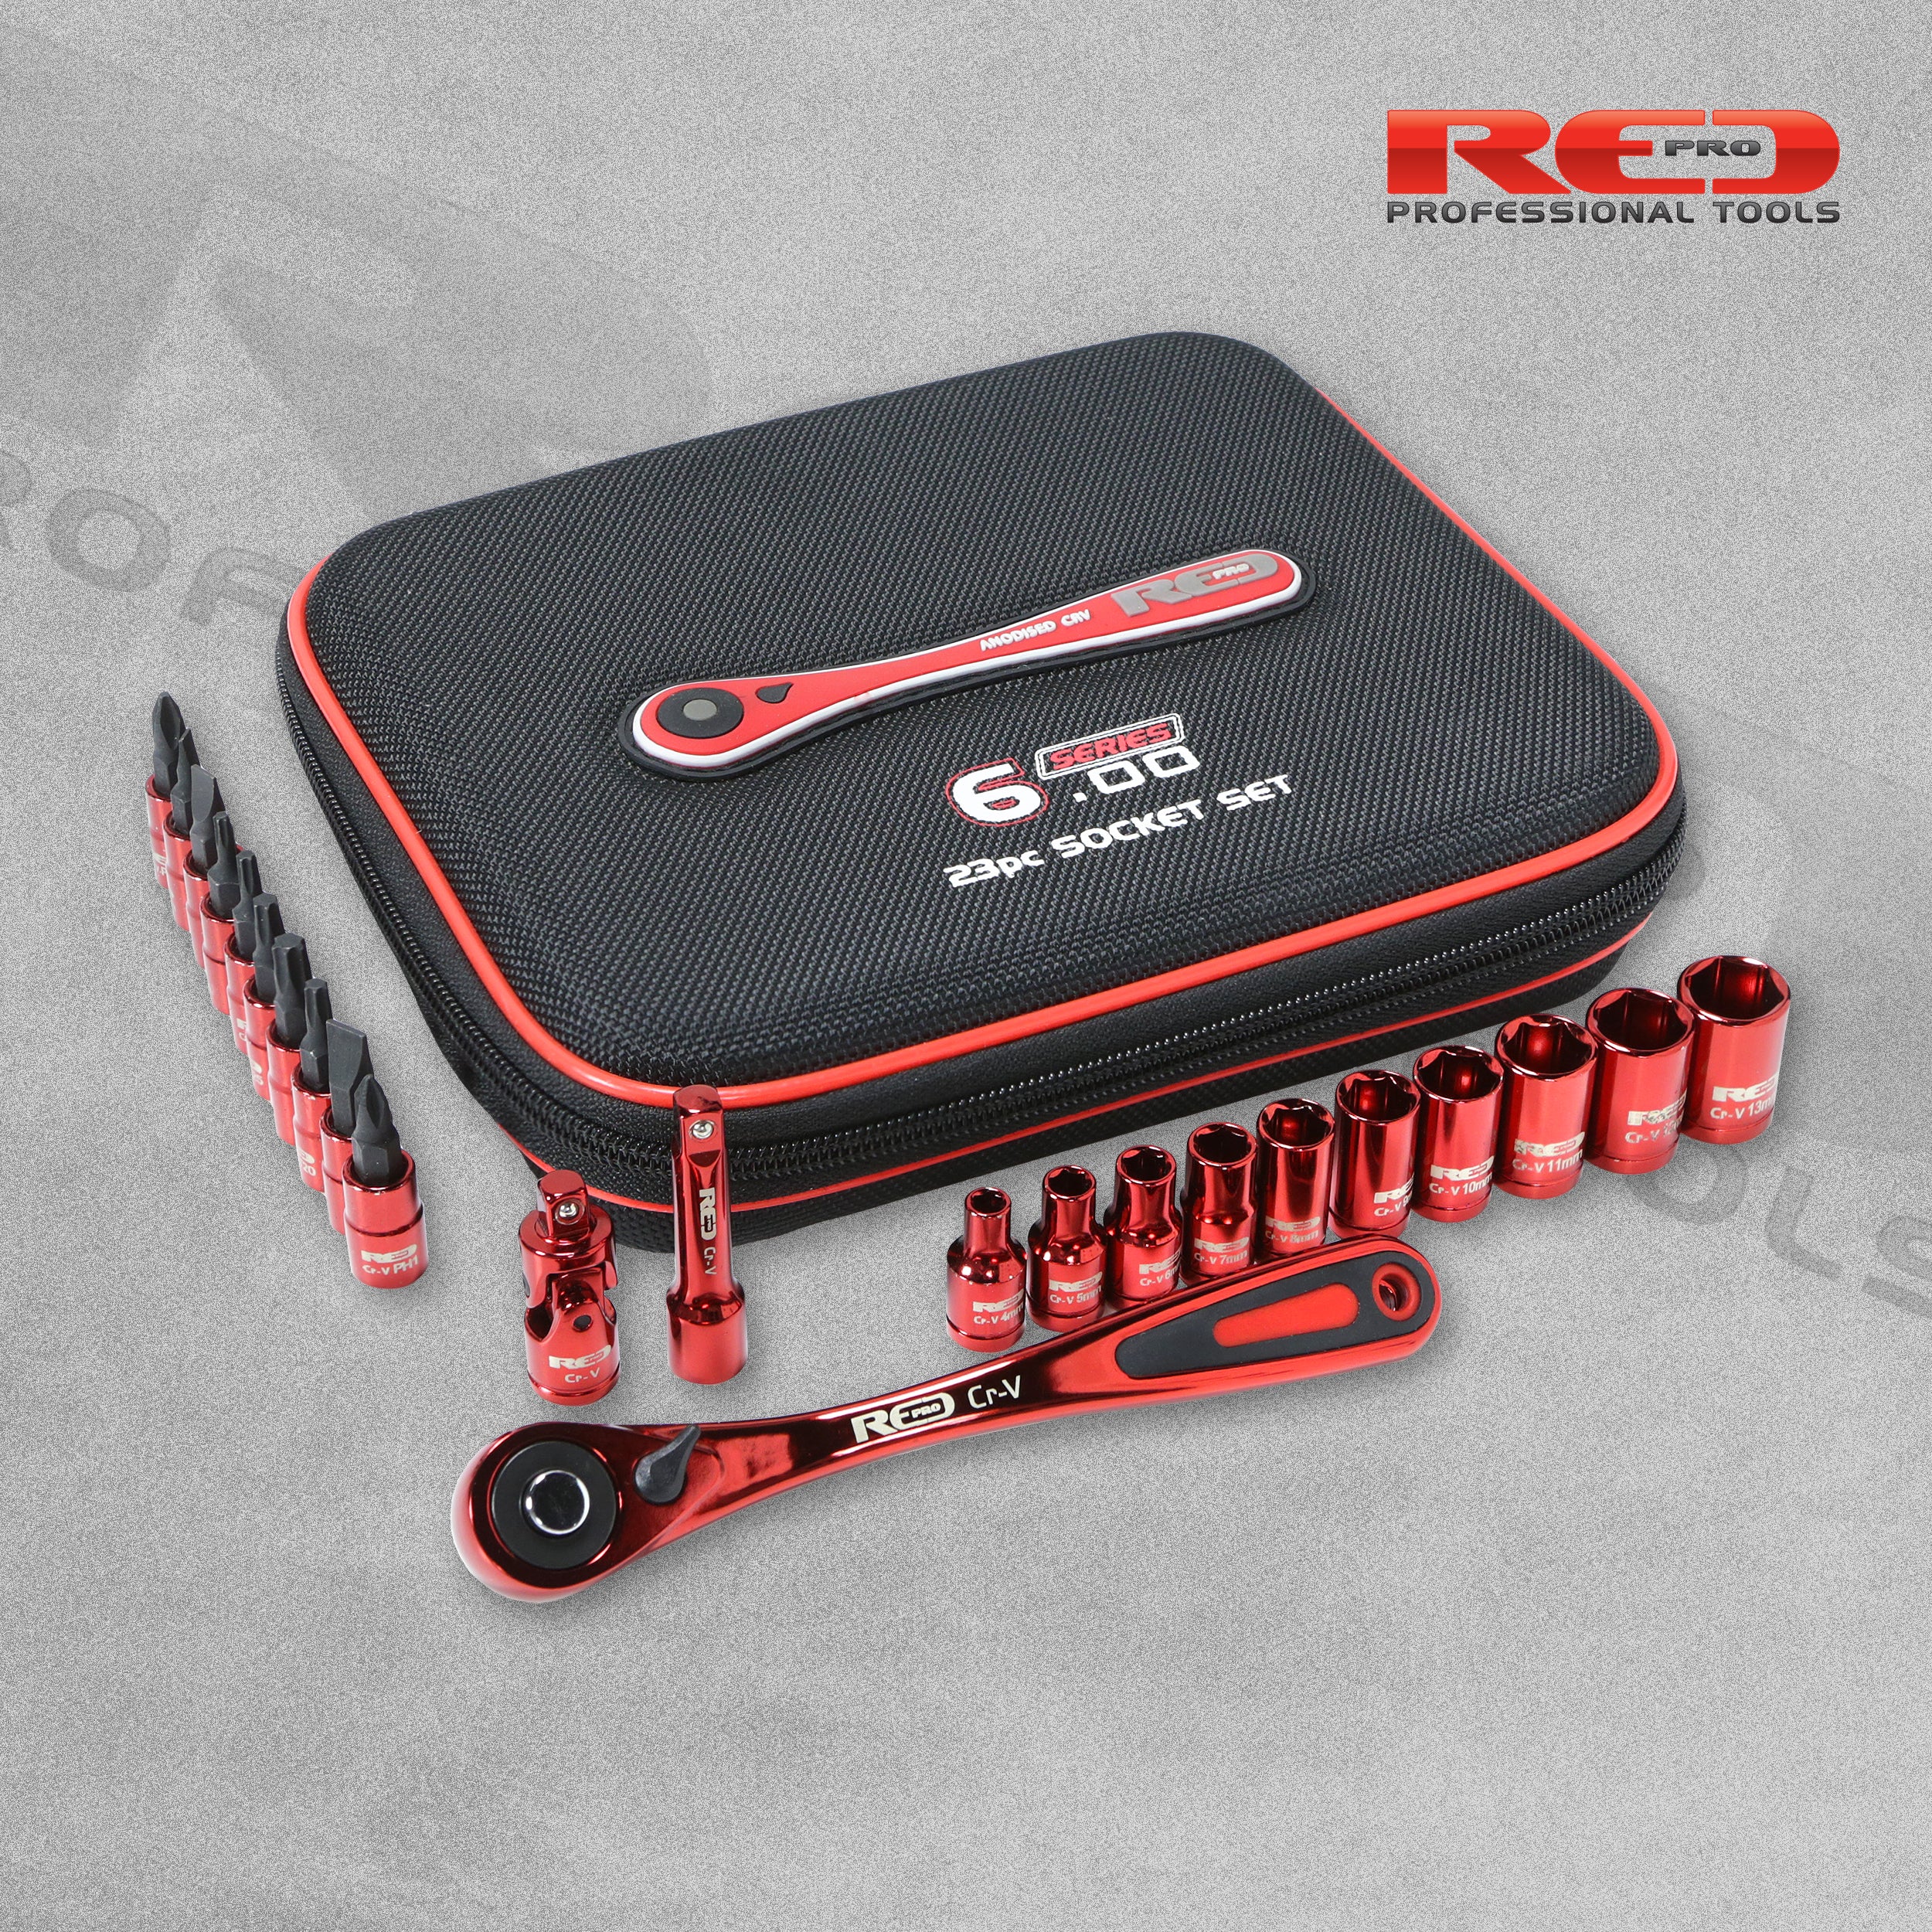 Red Pro Tools 23pc Socket Set 1/4" Drive (6.00 Series) - Red